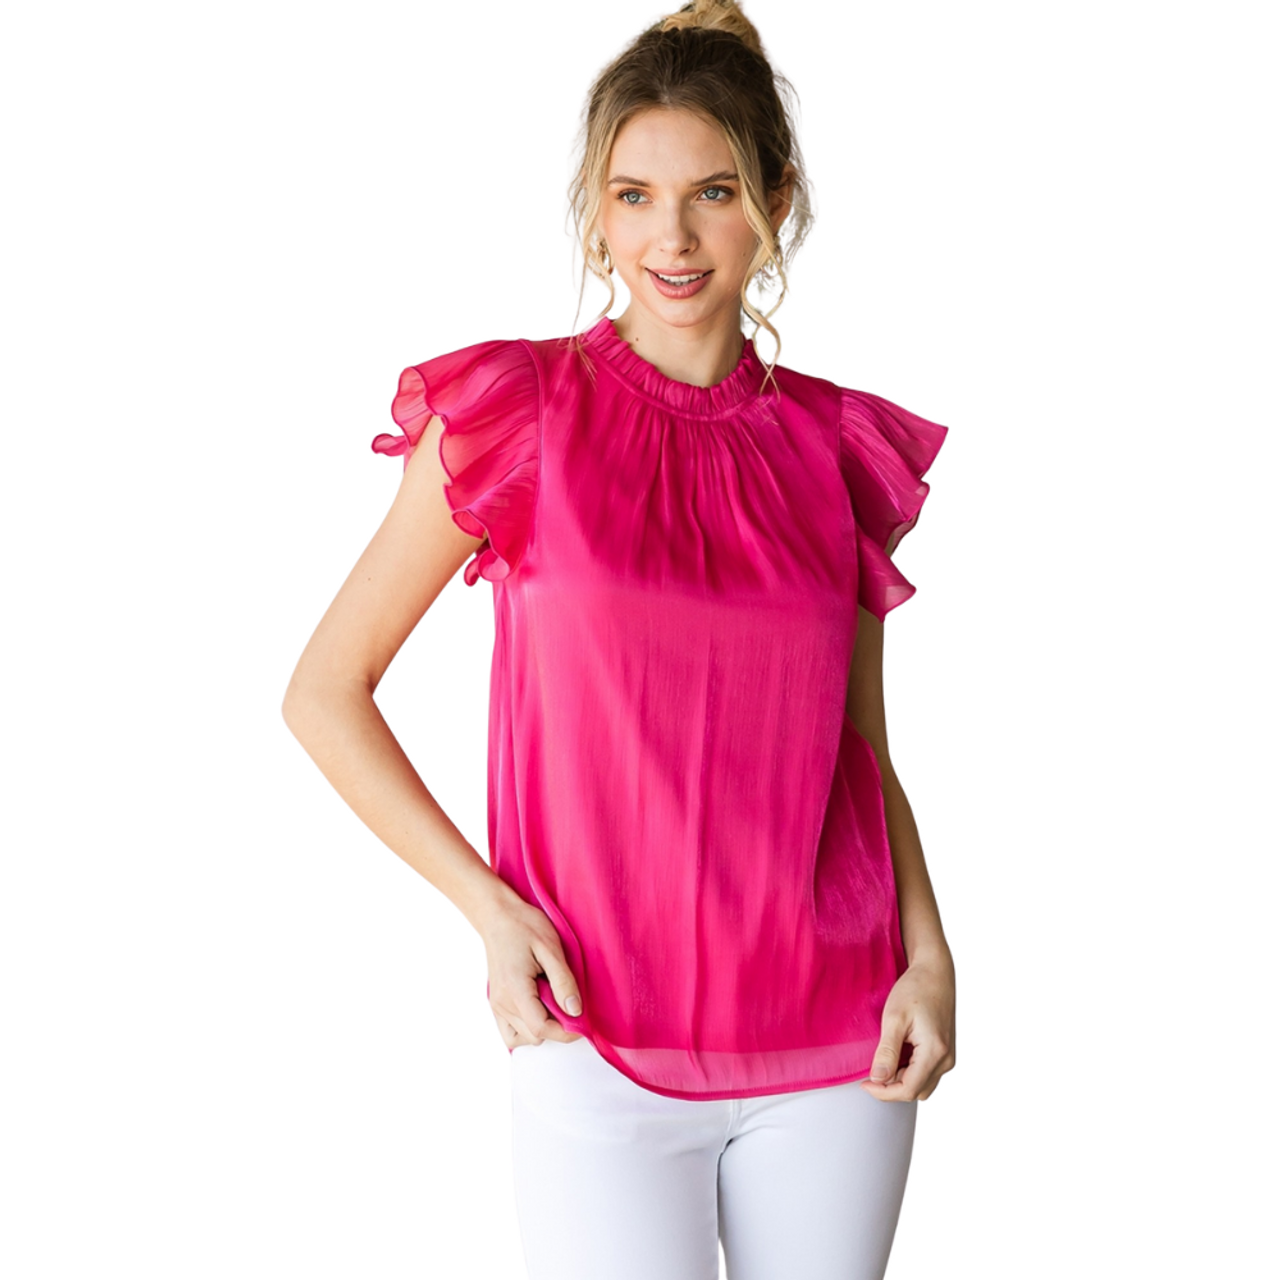 Jodifl Solid top with a frill mock neckline and ruffle cap sleeves Pink